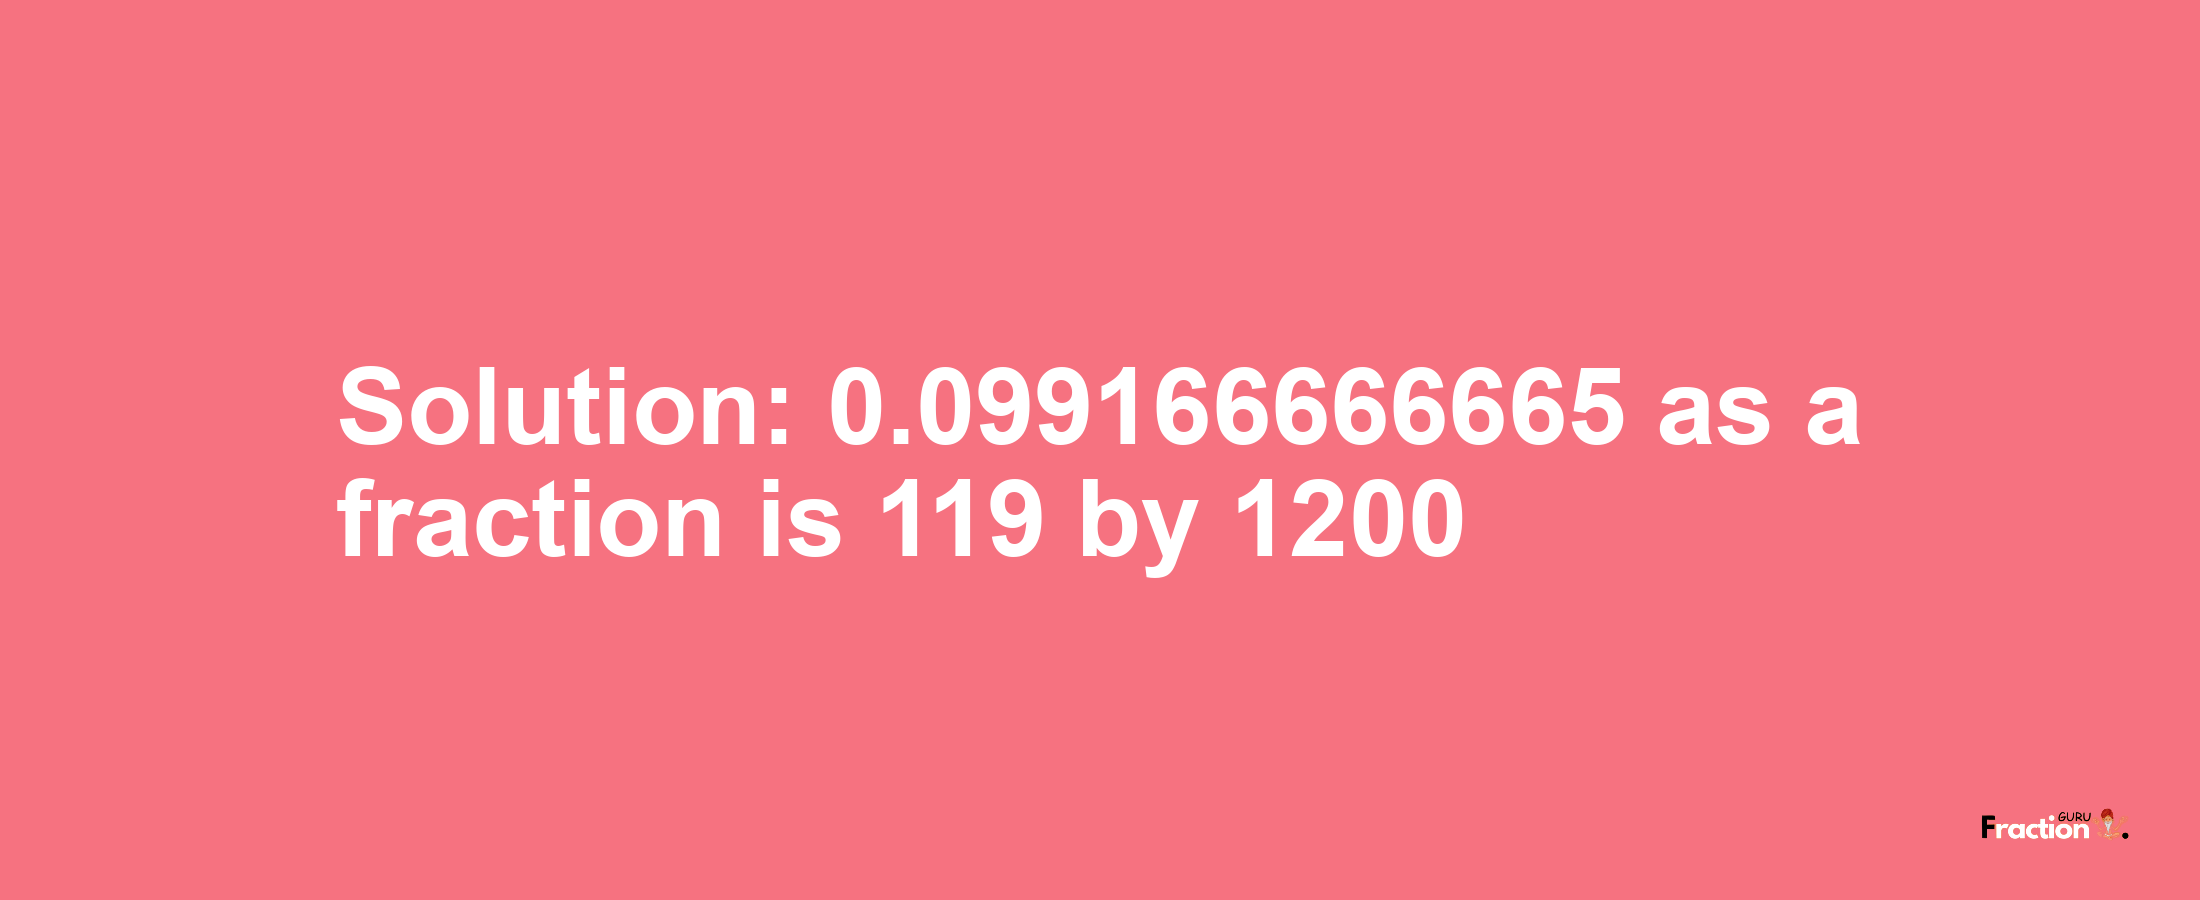 Solution:0.099166666665 as a fraction is 119/1200